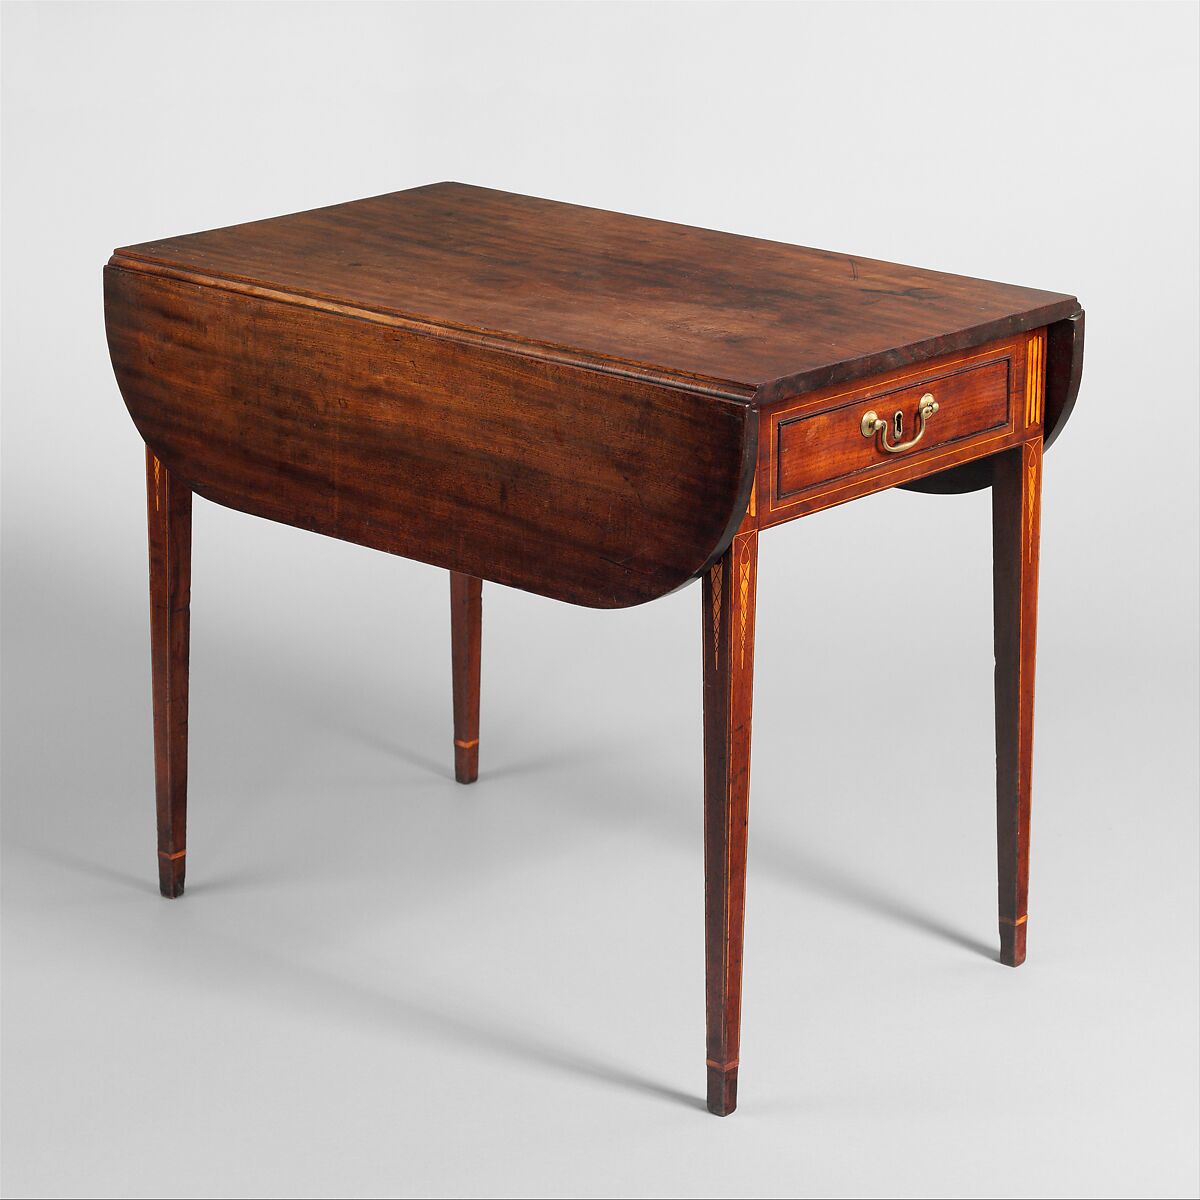 Drop-leaf Pembroke Table, John Townsend (1732–1809), Primary wood: mahogany and lightwood inlays; secondary woods: maple and chestnut, American 